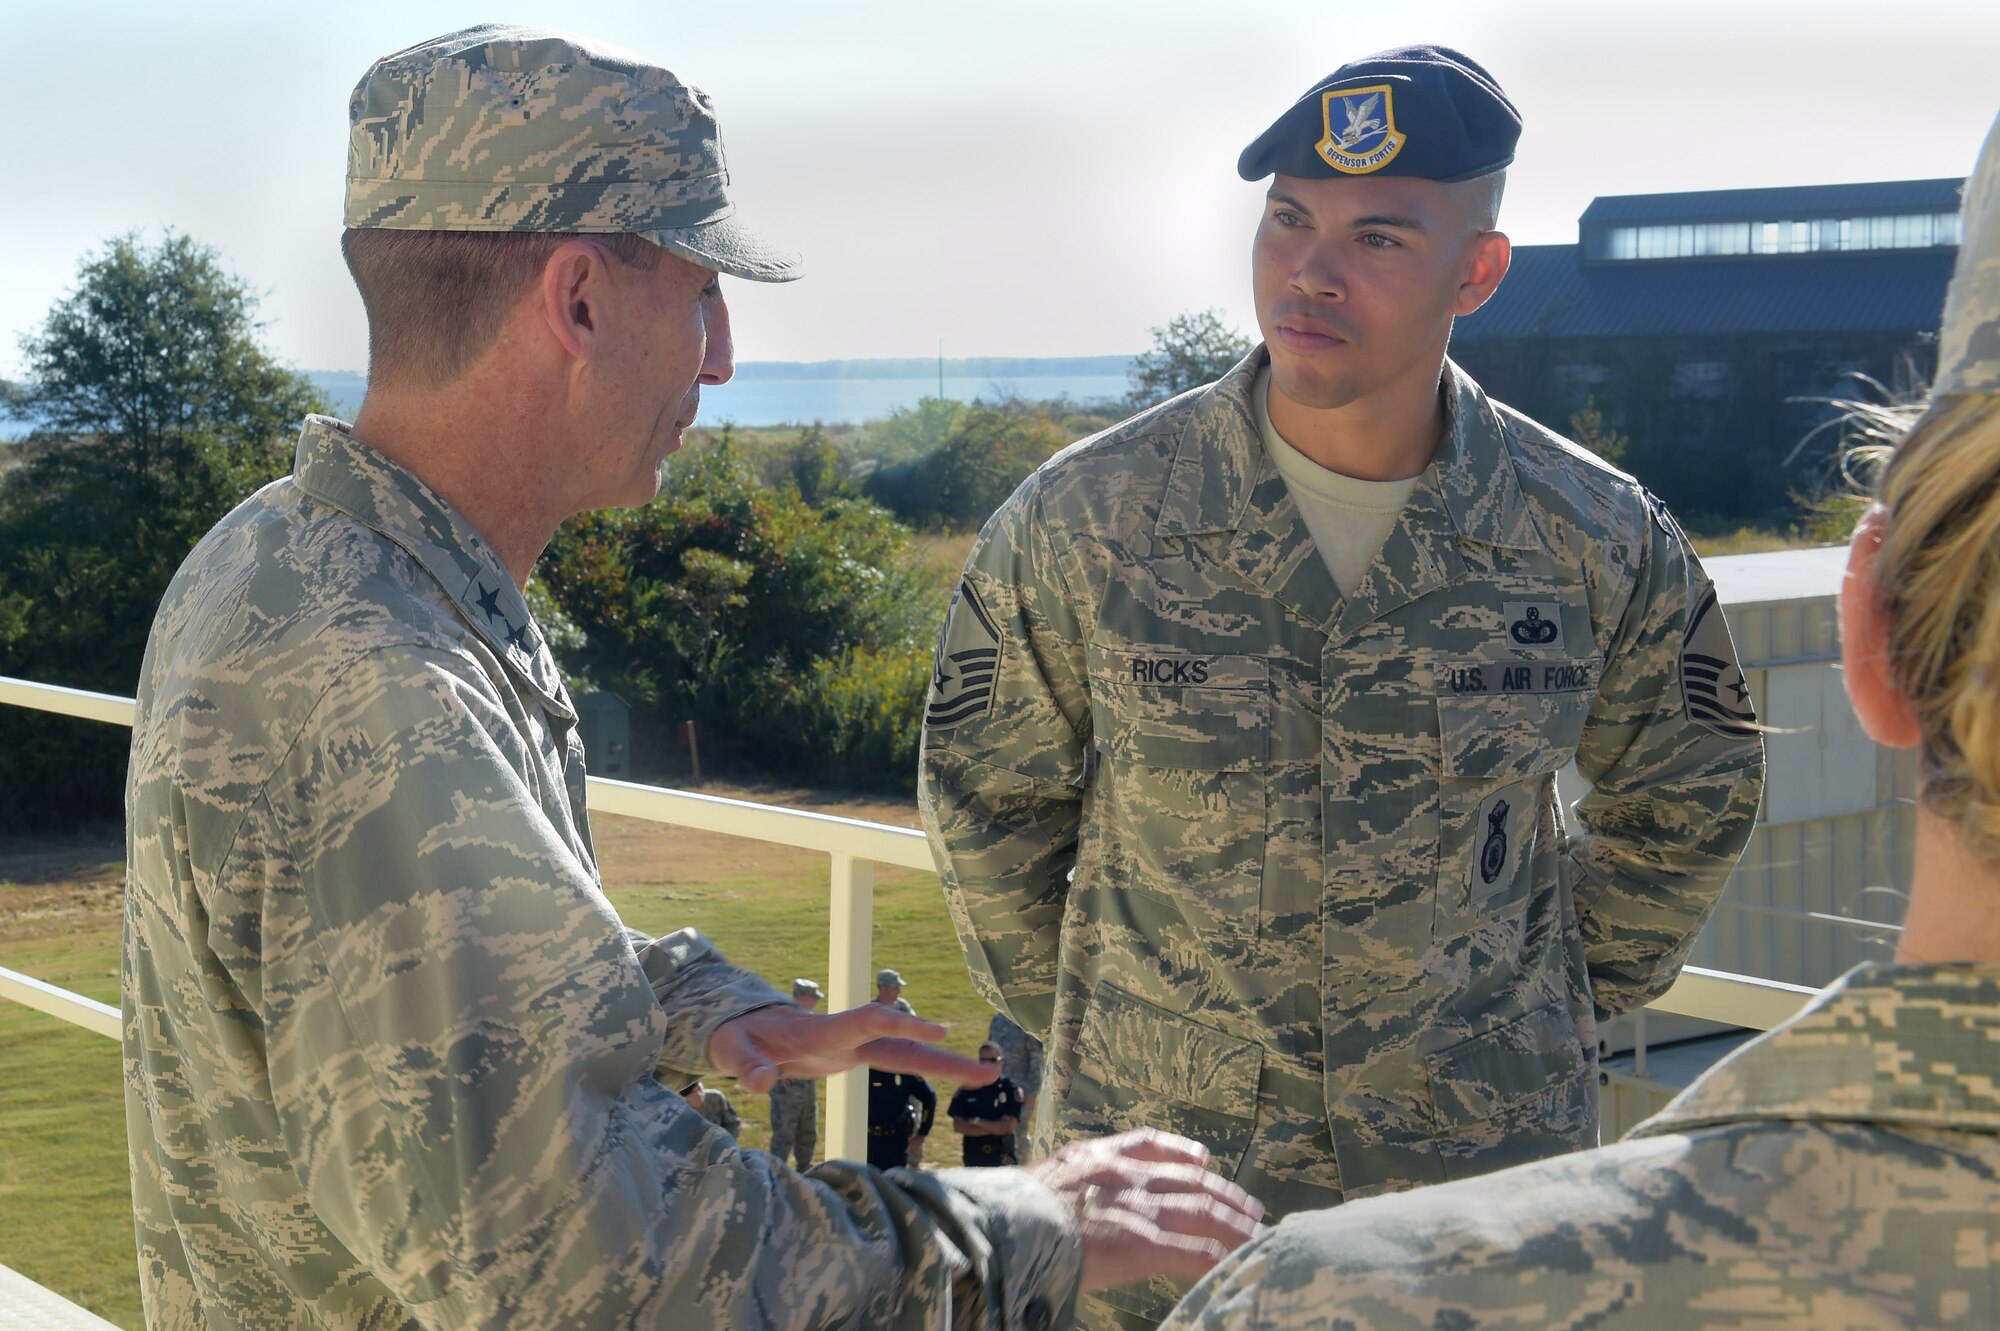 From left, U.S. Air Force Maj. Gen. Scott Zobrist, 9th Air Force commander, speaks with Master Sgt. Christopher Ricks, 633rd Security Forces Squadron NCO in charge of training, during a tour of SFS training facilities at Joint Base Langley-Eusits, Va., Oct. 18, 2016. Zorbist experienced how security forces members train, as well as toured the shooting range while speaking with local law enforcement leadership. (U.S. Air Force photo by Senior Airman Kimberly Nagle)